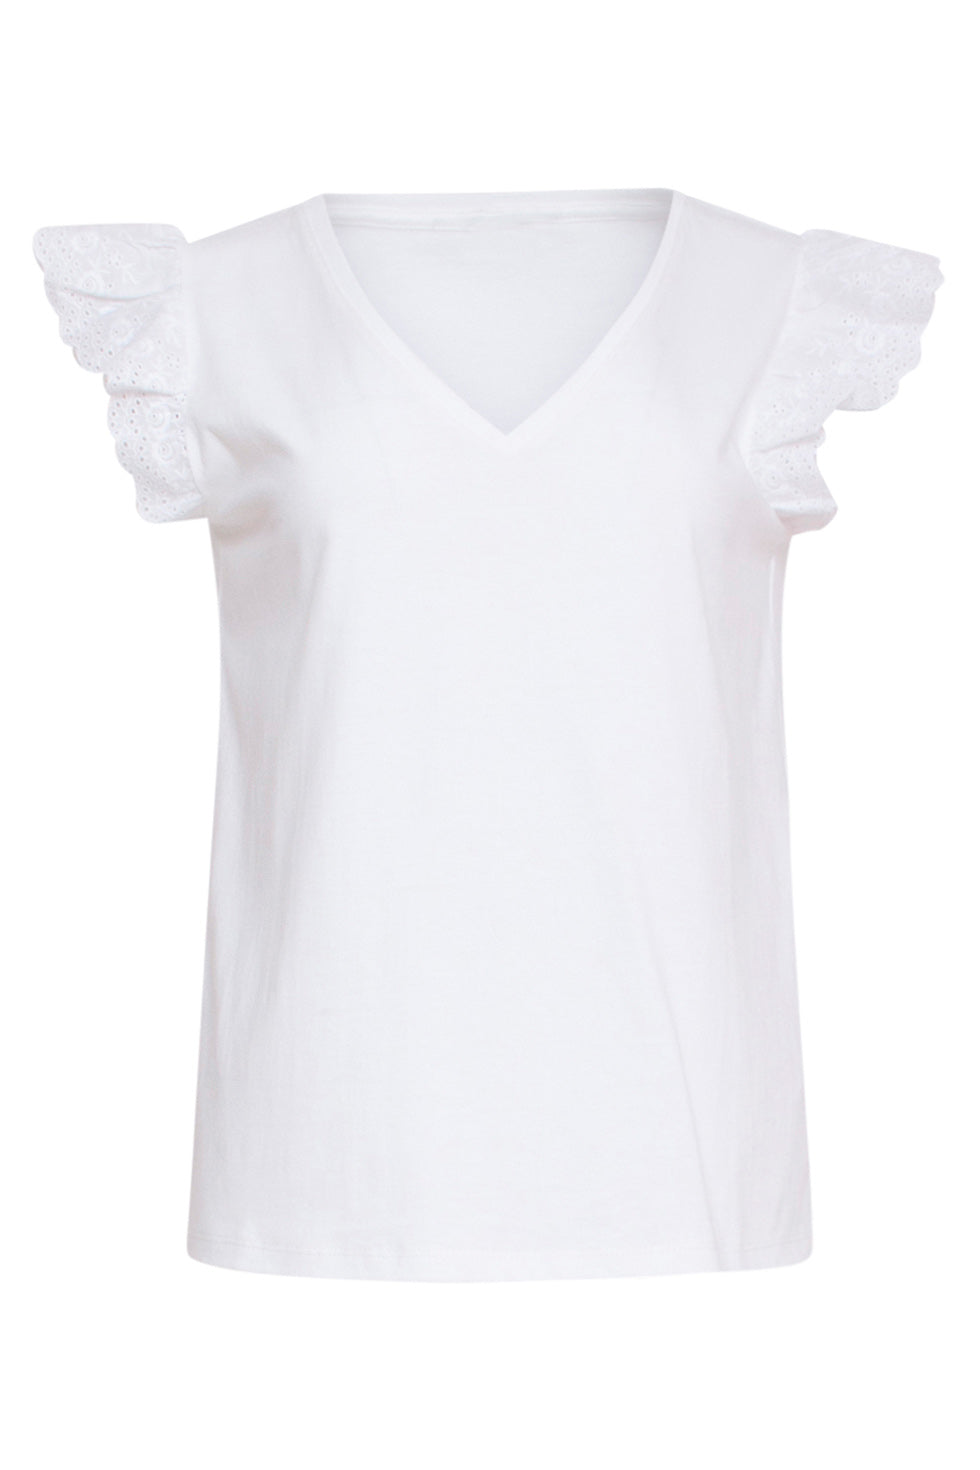 24170 Basic Witte Top Met Broderie Anglaise